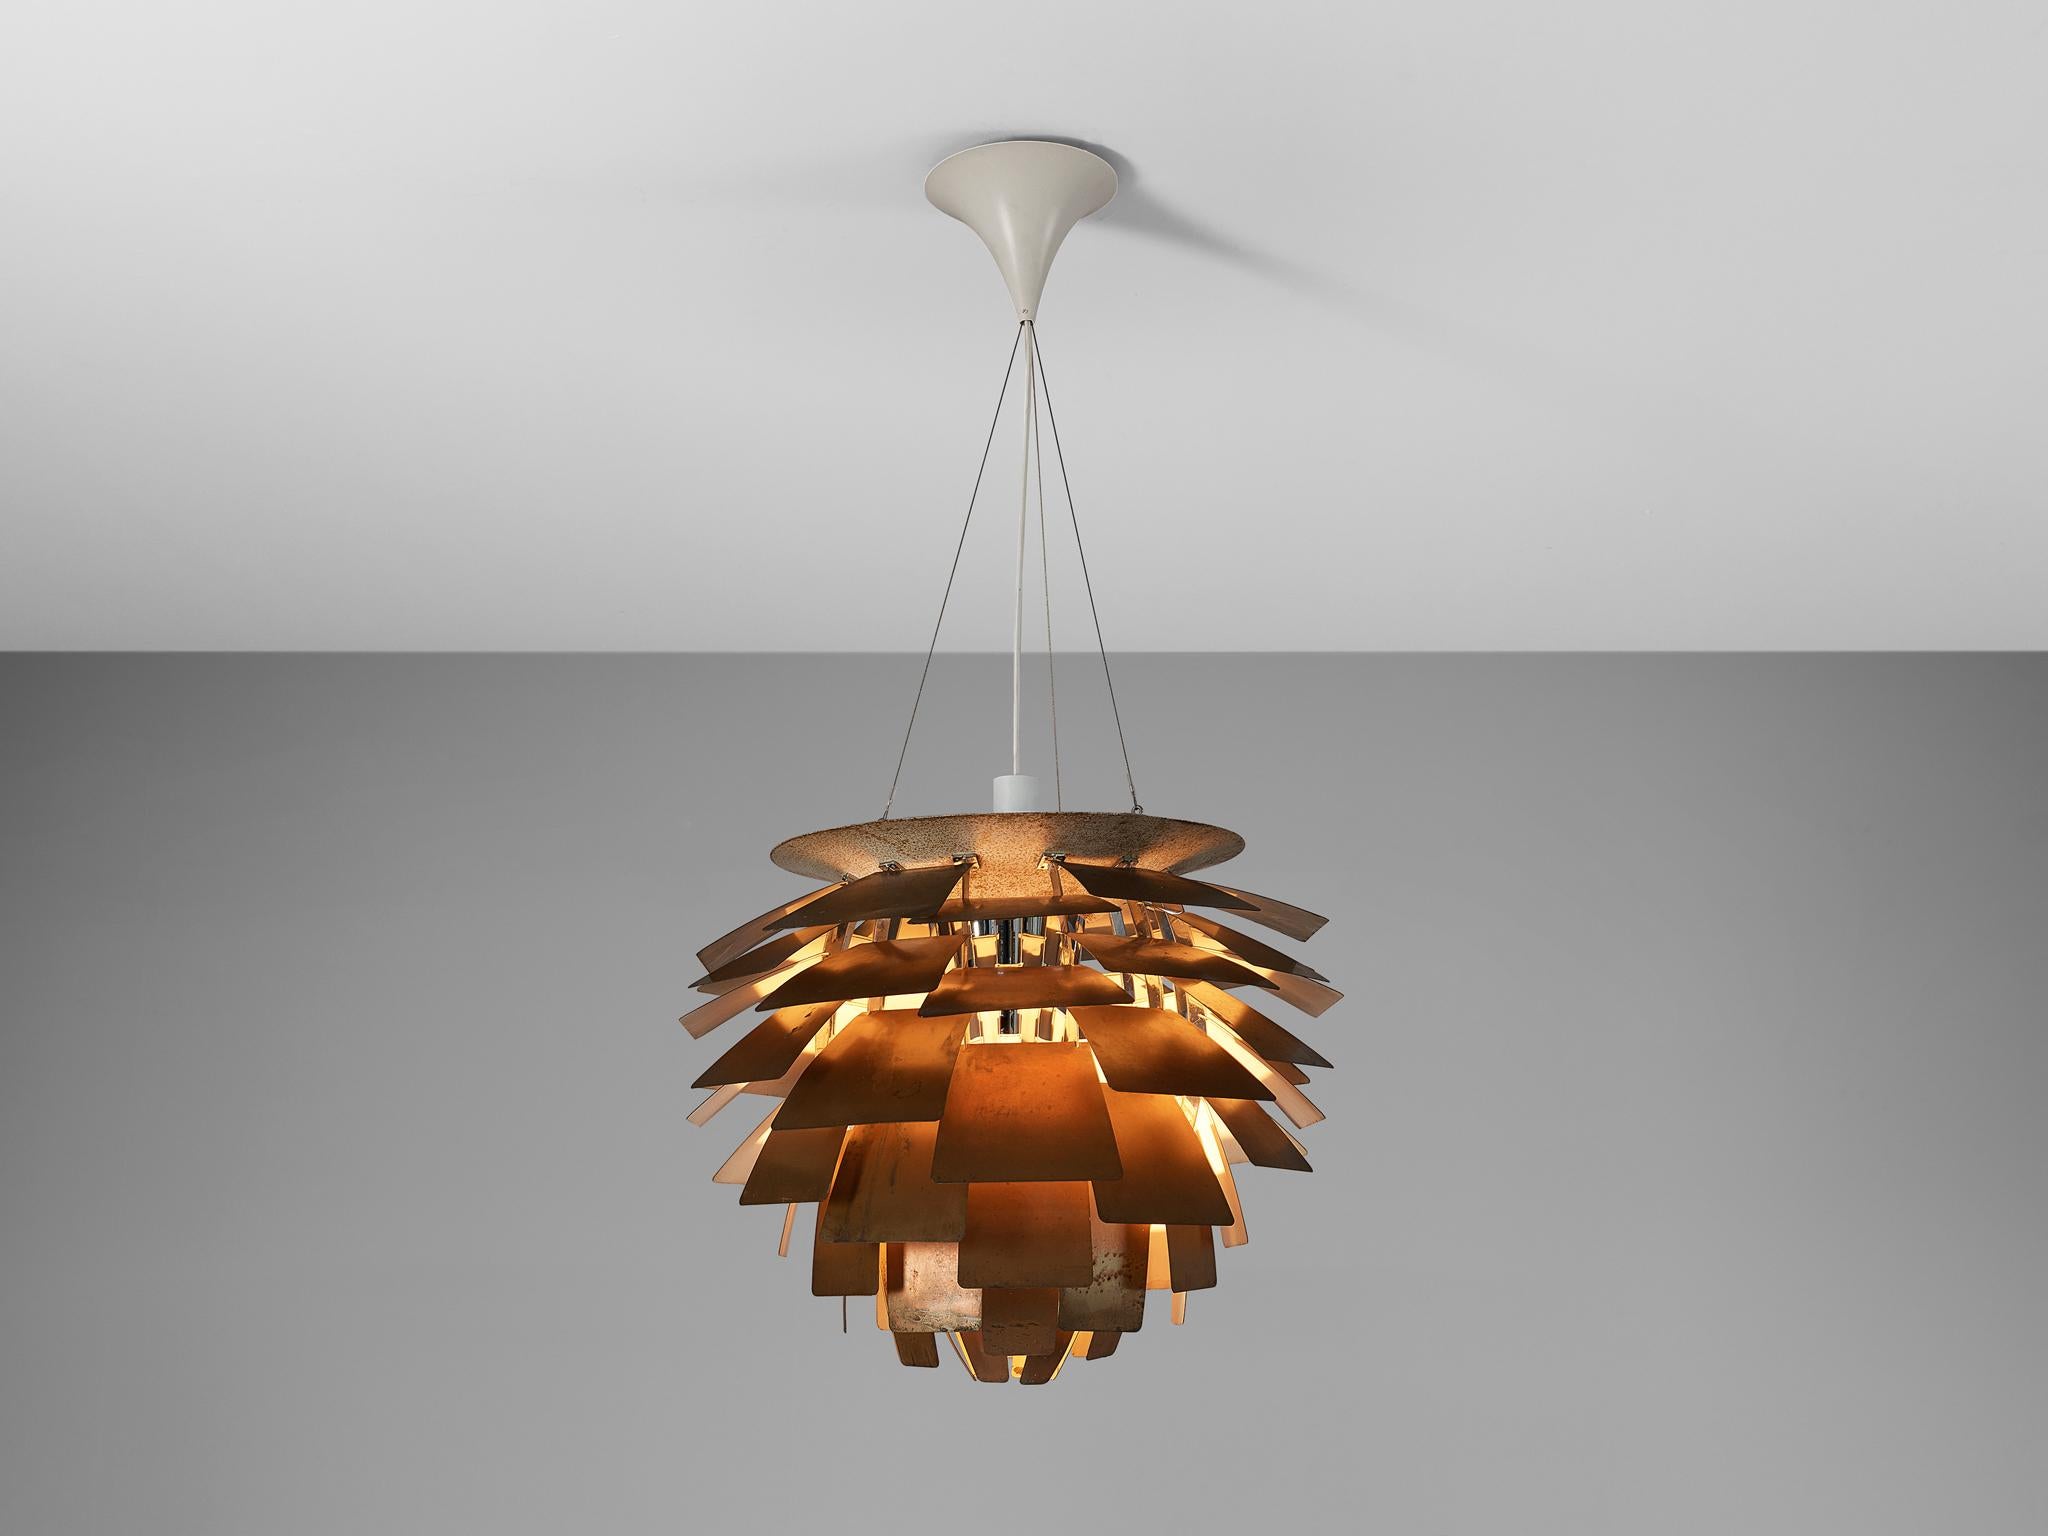 Poul Henningsen for Louis Poulsen, 'PH-Artichoke' pendant, patinated copper, design 1957, manufactured 1950s, Denmark. 

The 'Artichoke' pendant is an all time eyecatcher in the lighting design. This iconic pendant, designed by Poul Henningsen, has